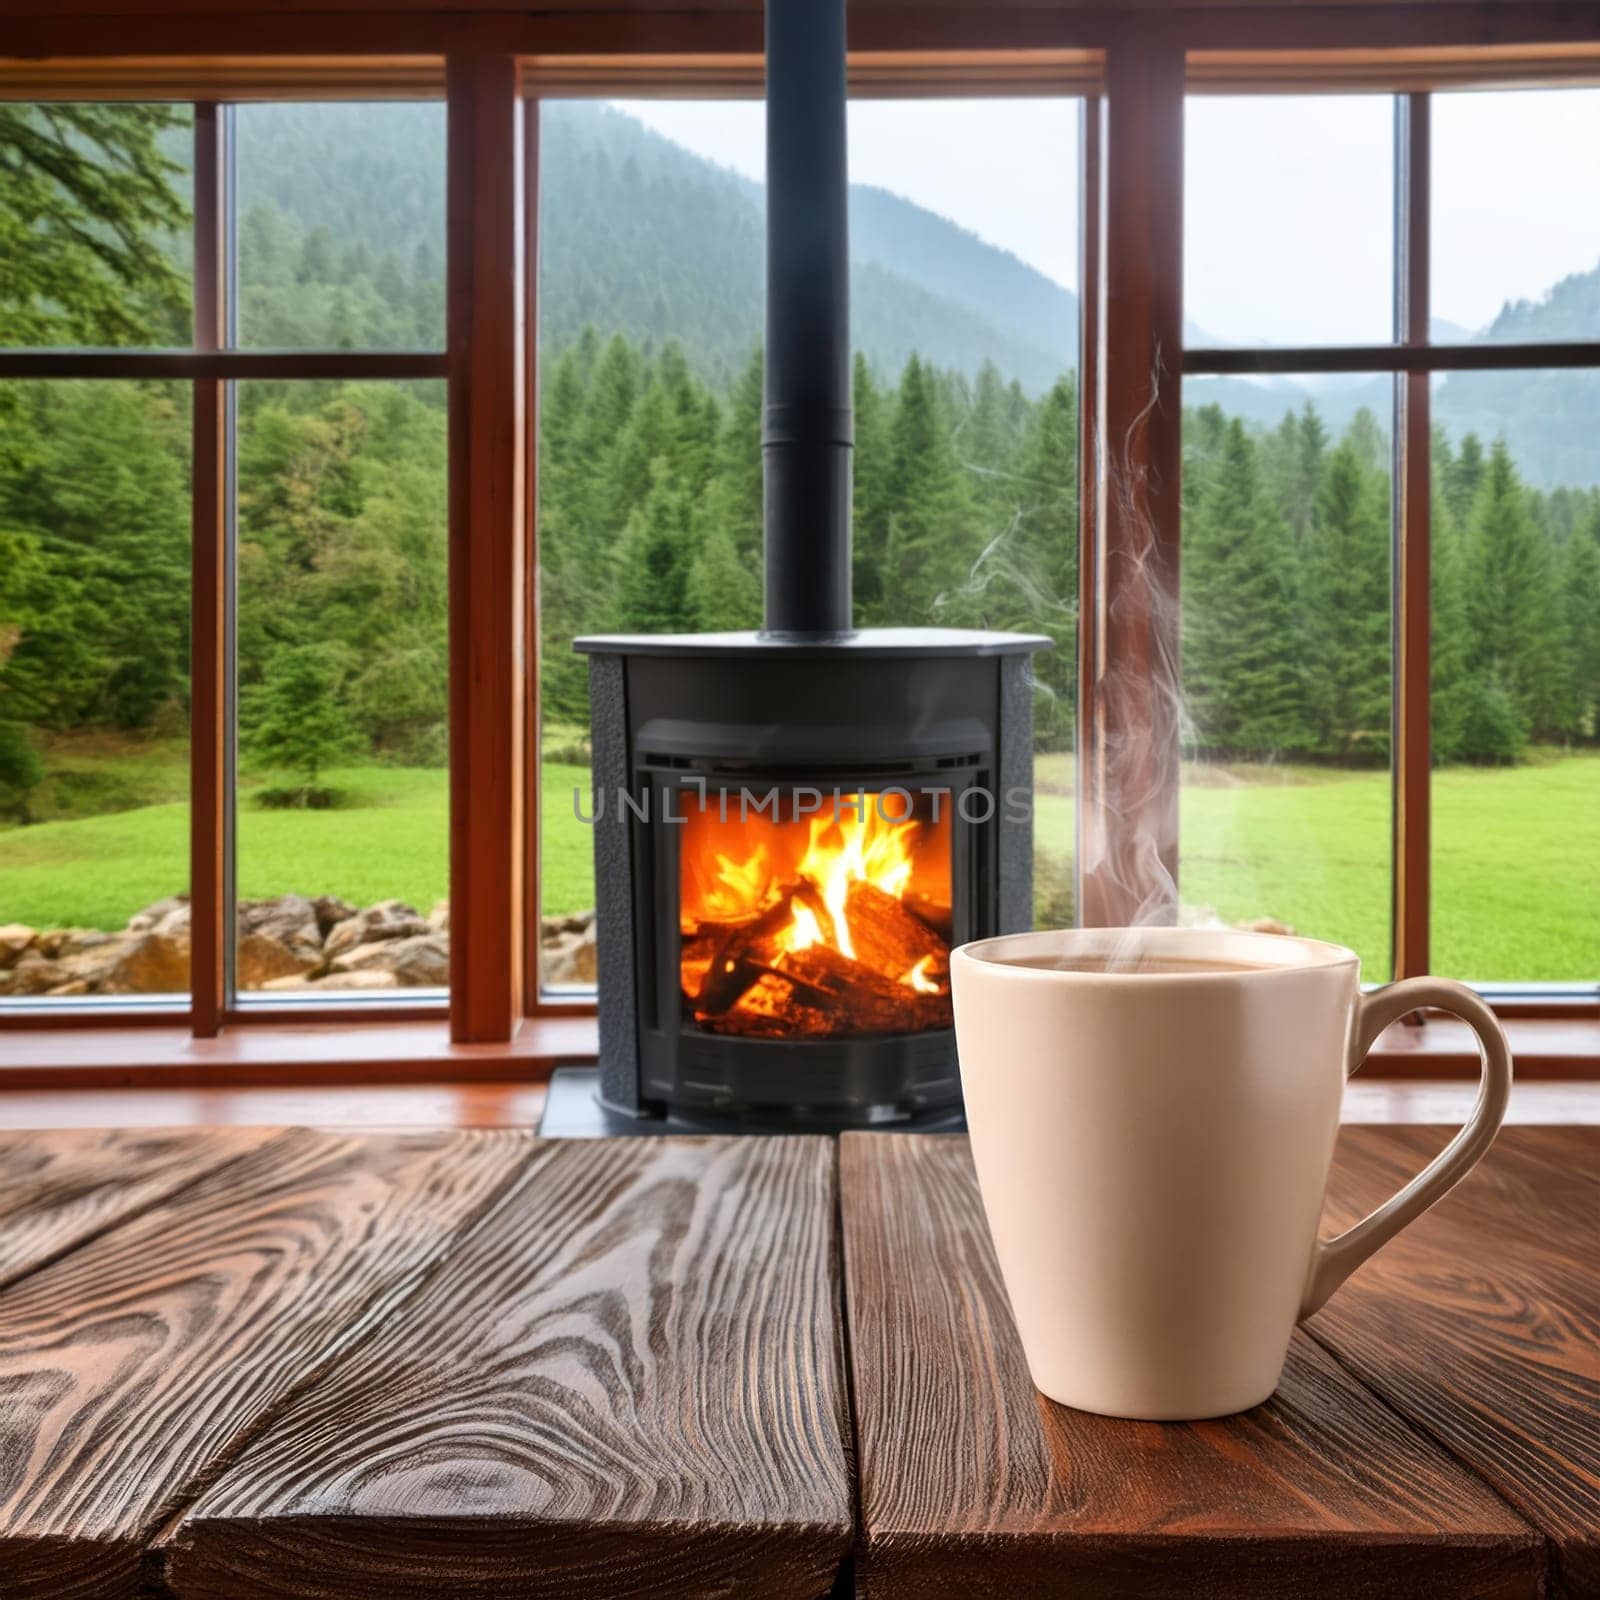 Wood is burning in the fireplace of a wooden cottage. Wild forested mountains outside the window. A cup stands on a wooden table. Steam rises from a hot drink. AI generated